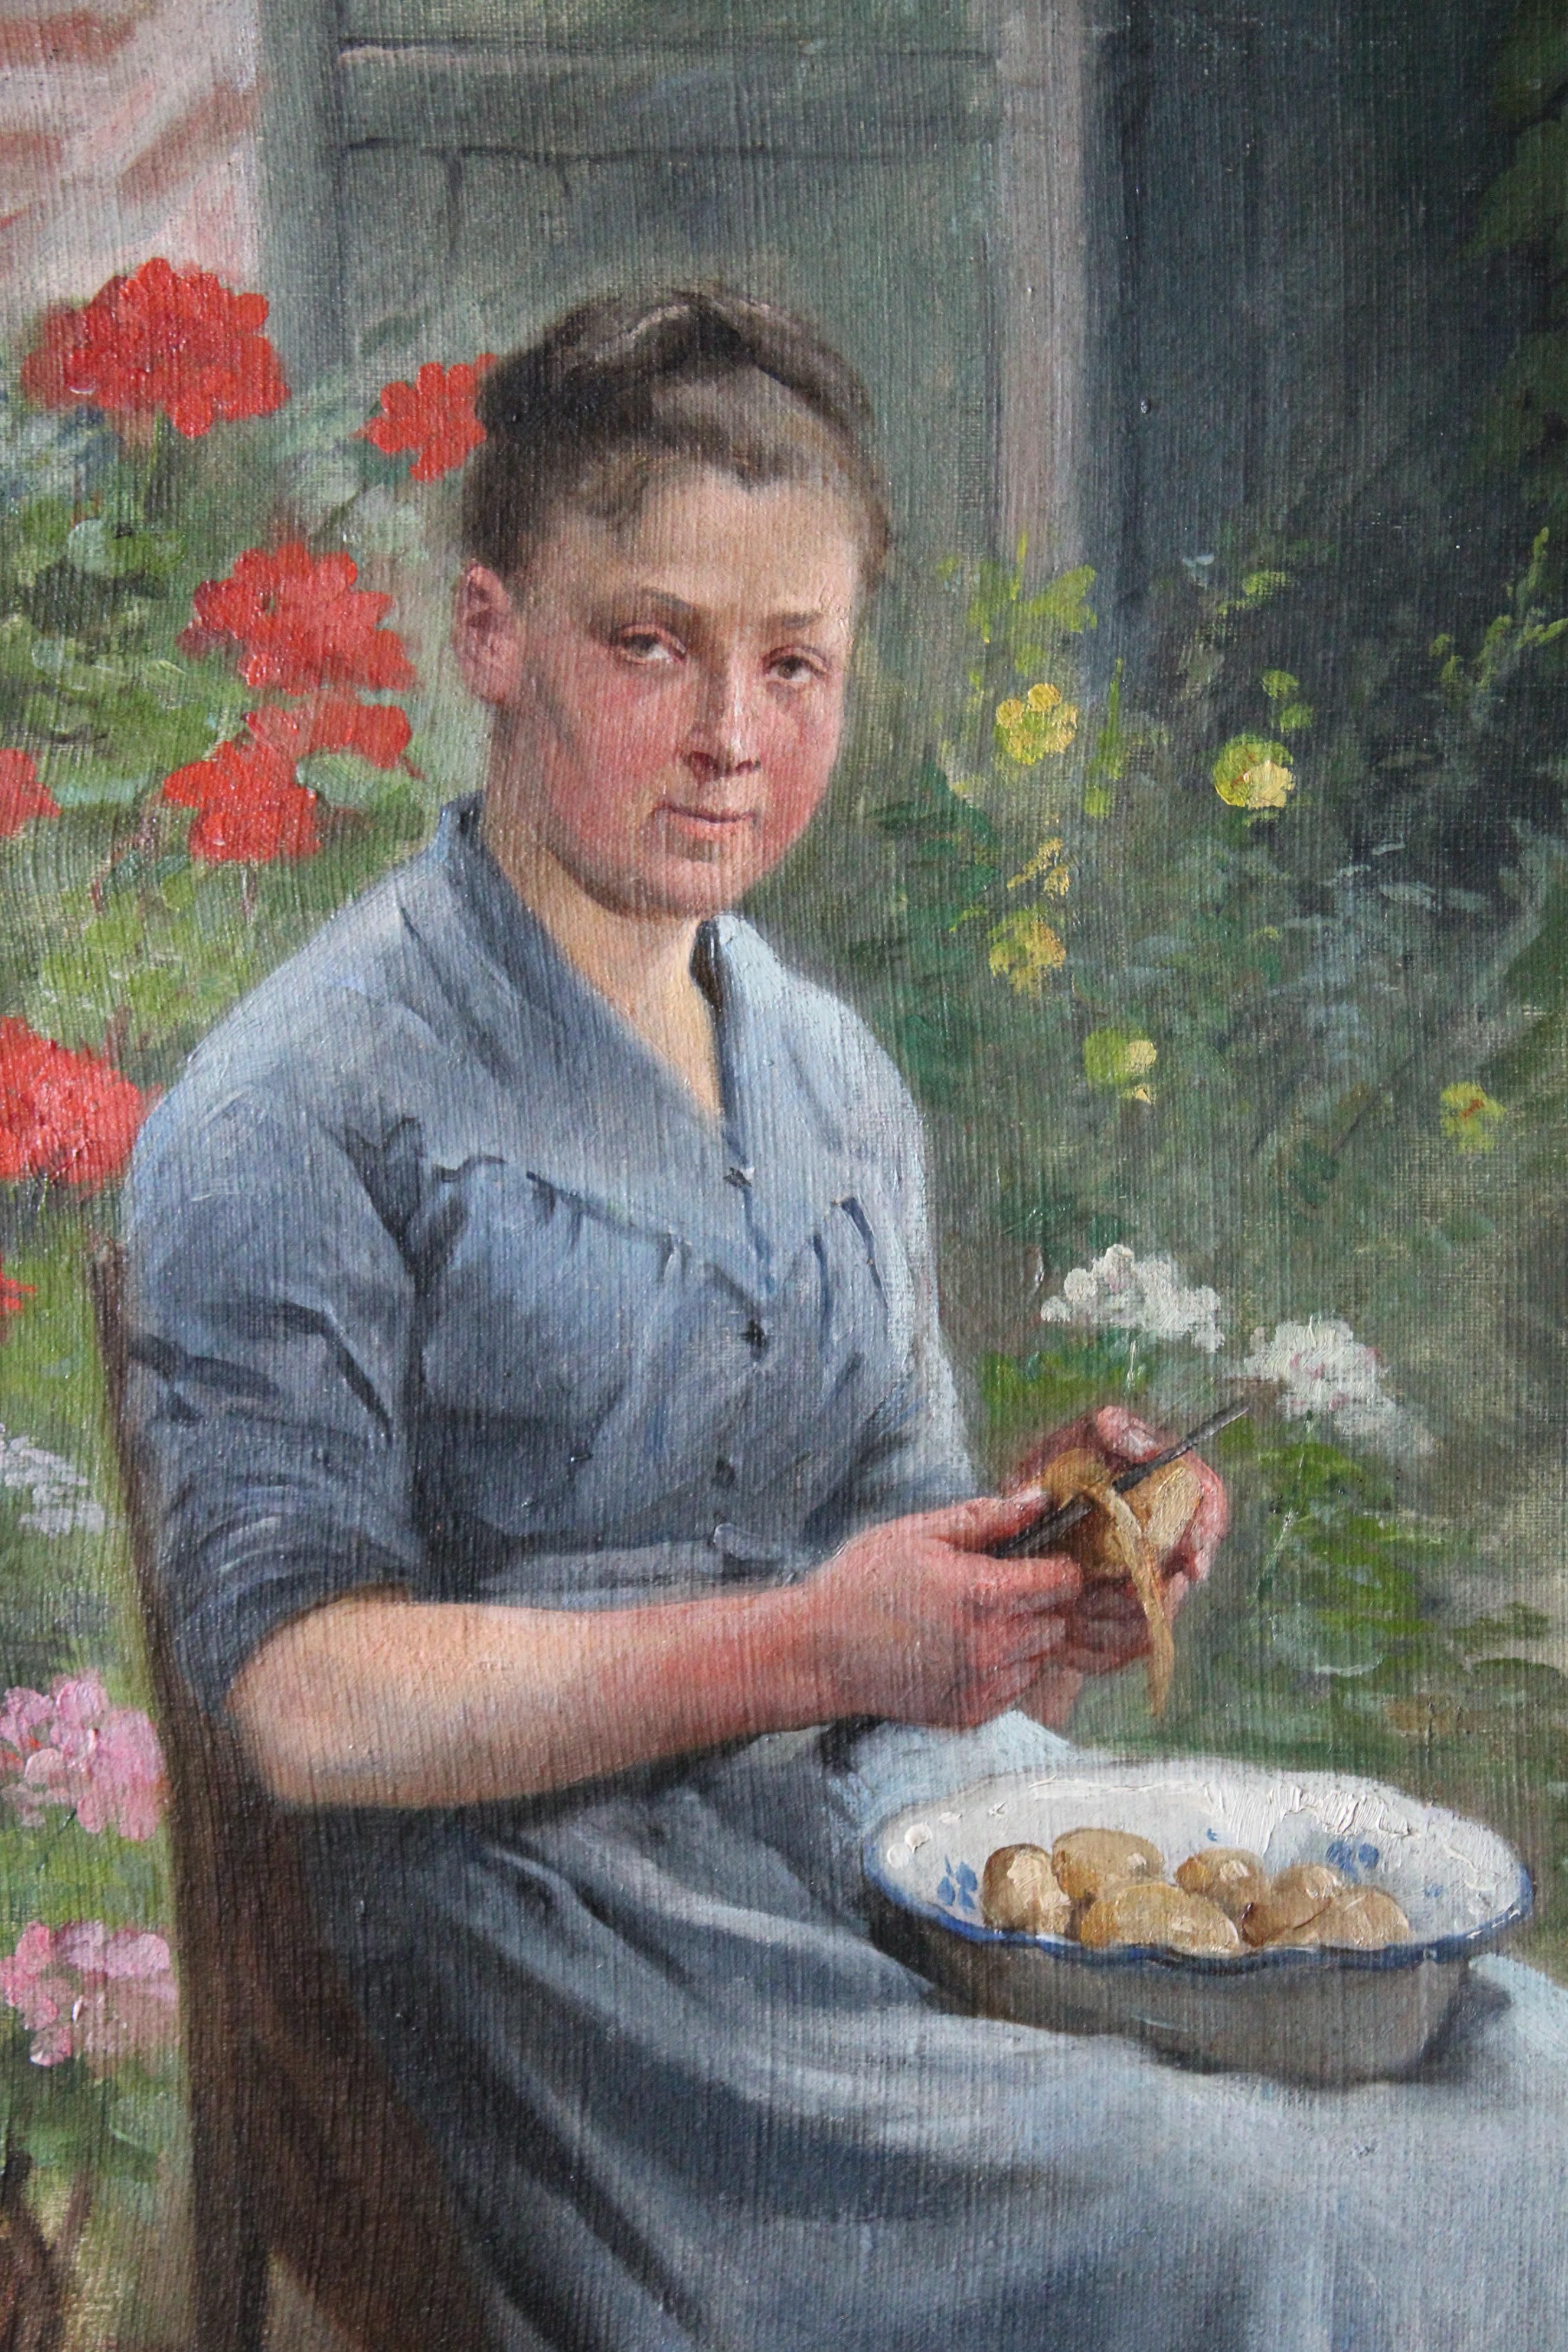 Antique, late 1800's oil portrait of a woman peeling potatoes by French artist, Marie Petit/Marie Adrien Lavieille (1852-1911).  This is a wonderful old painting by an accomplished female artist from the late 1800's.  A woman sits, peeling potatoes,